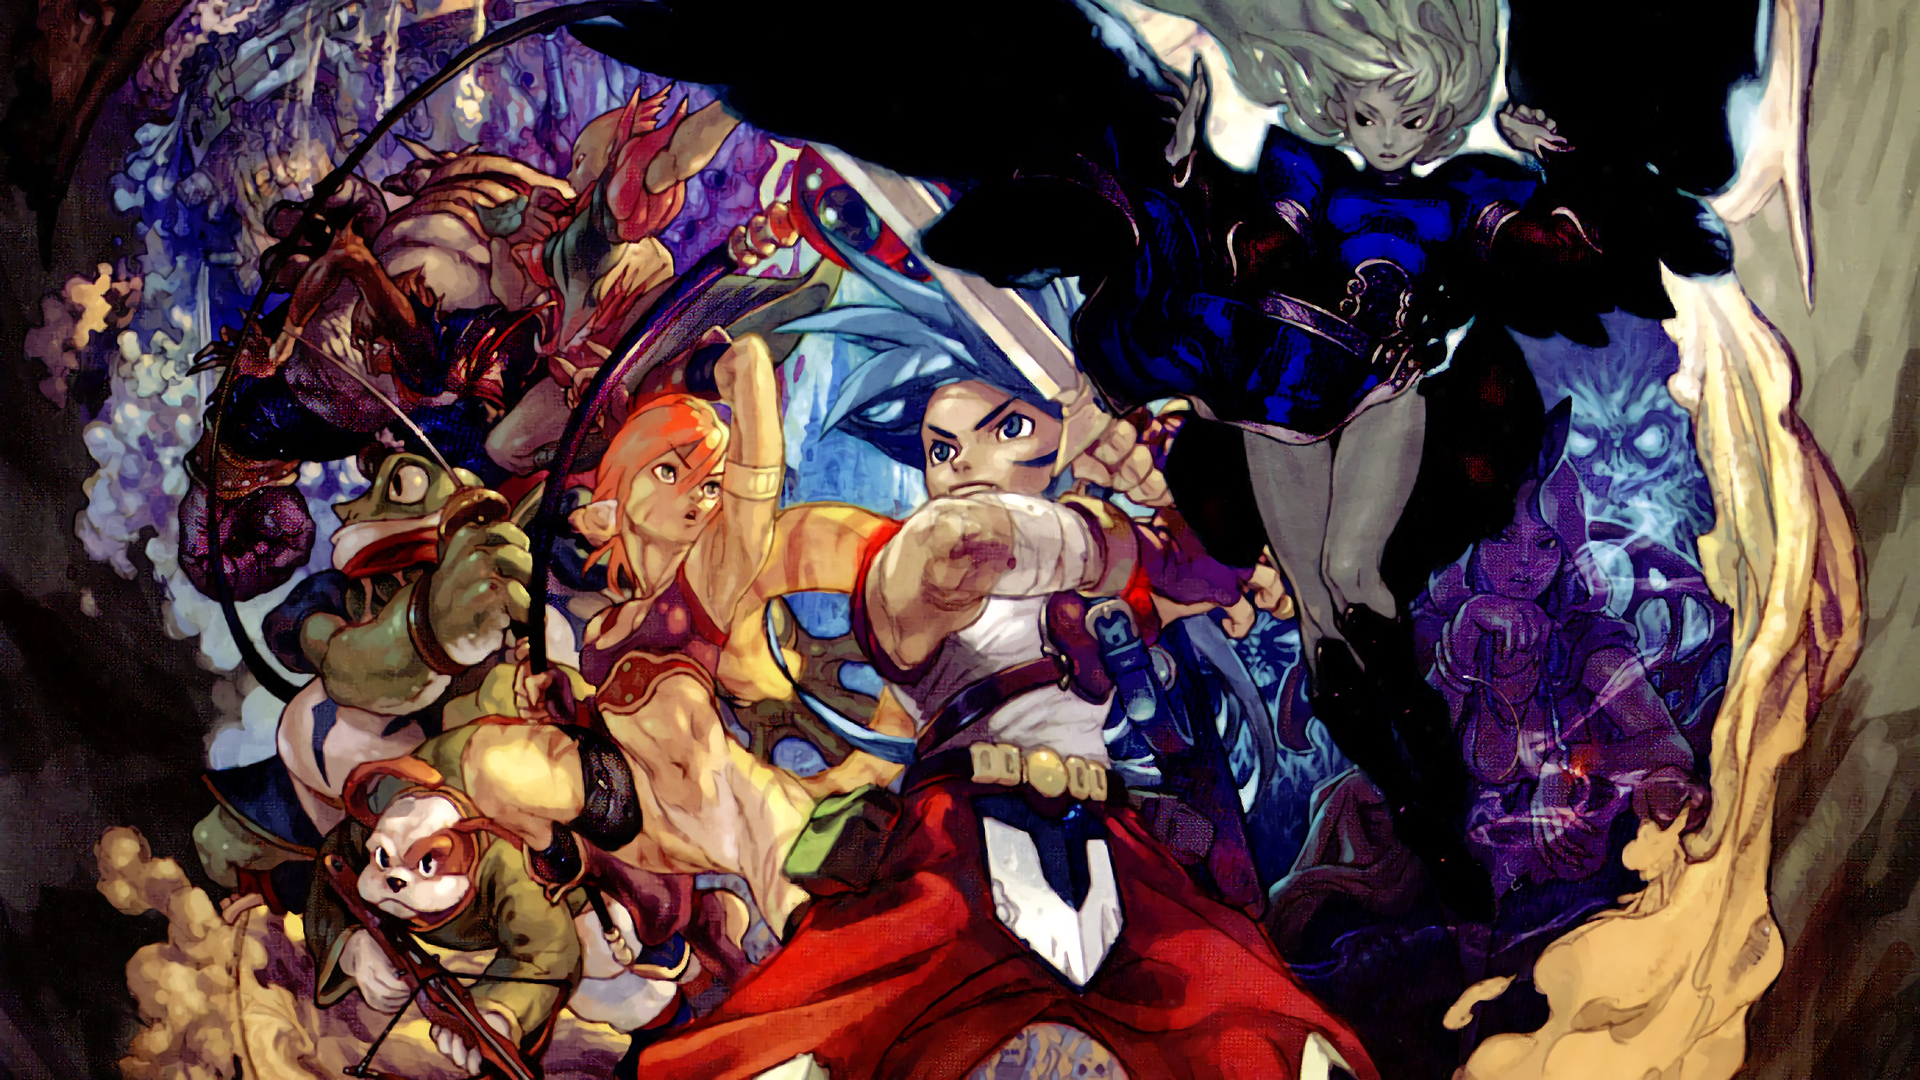 download breath of fire 2 3ds